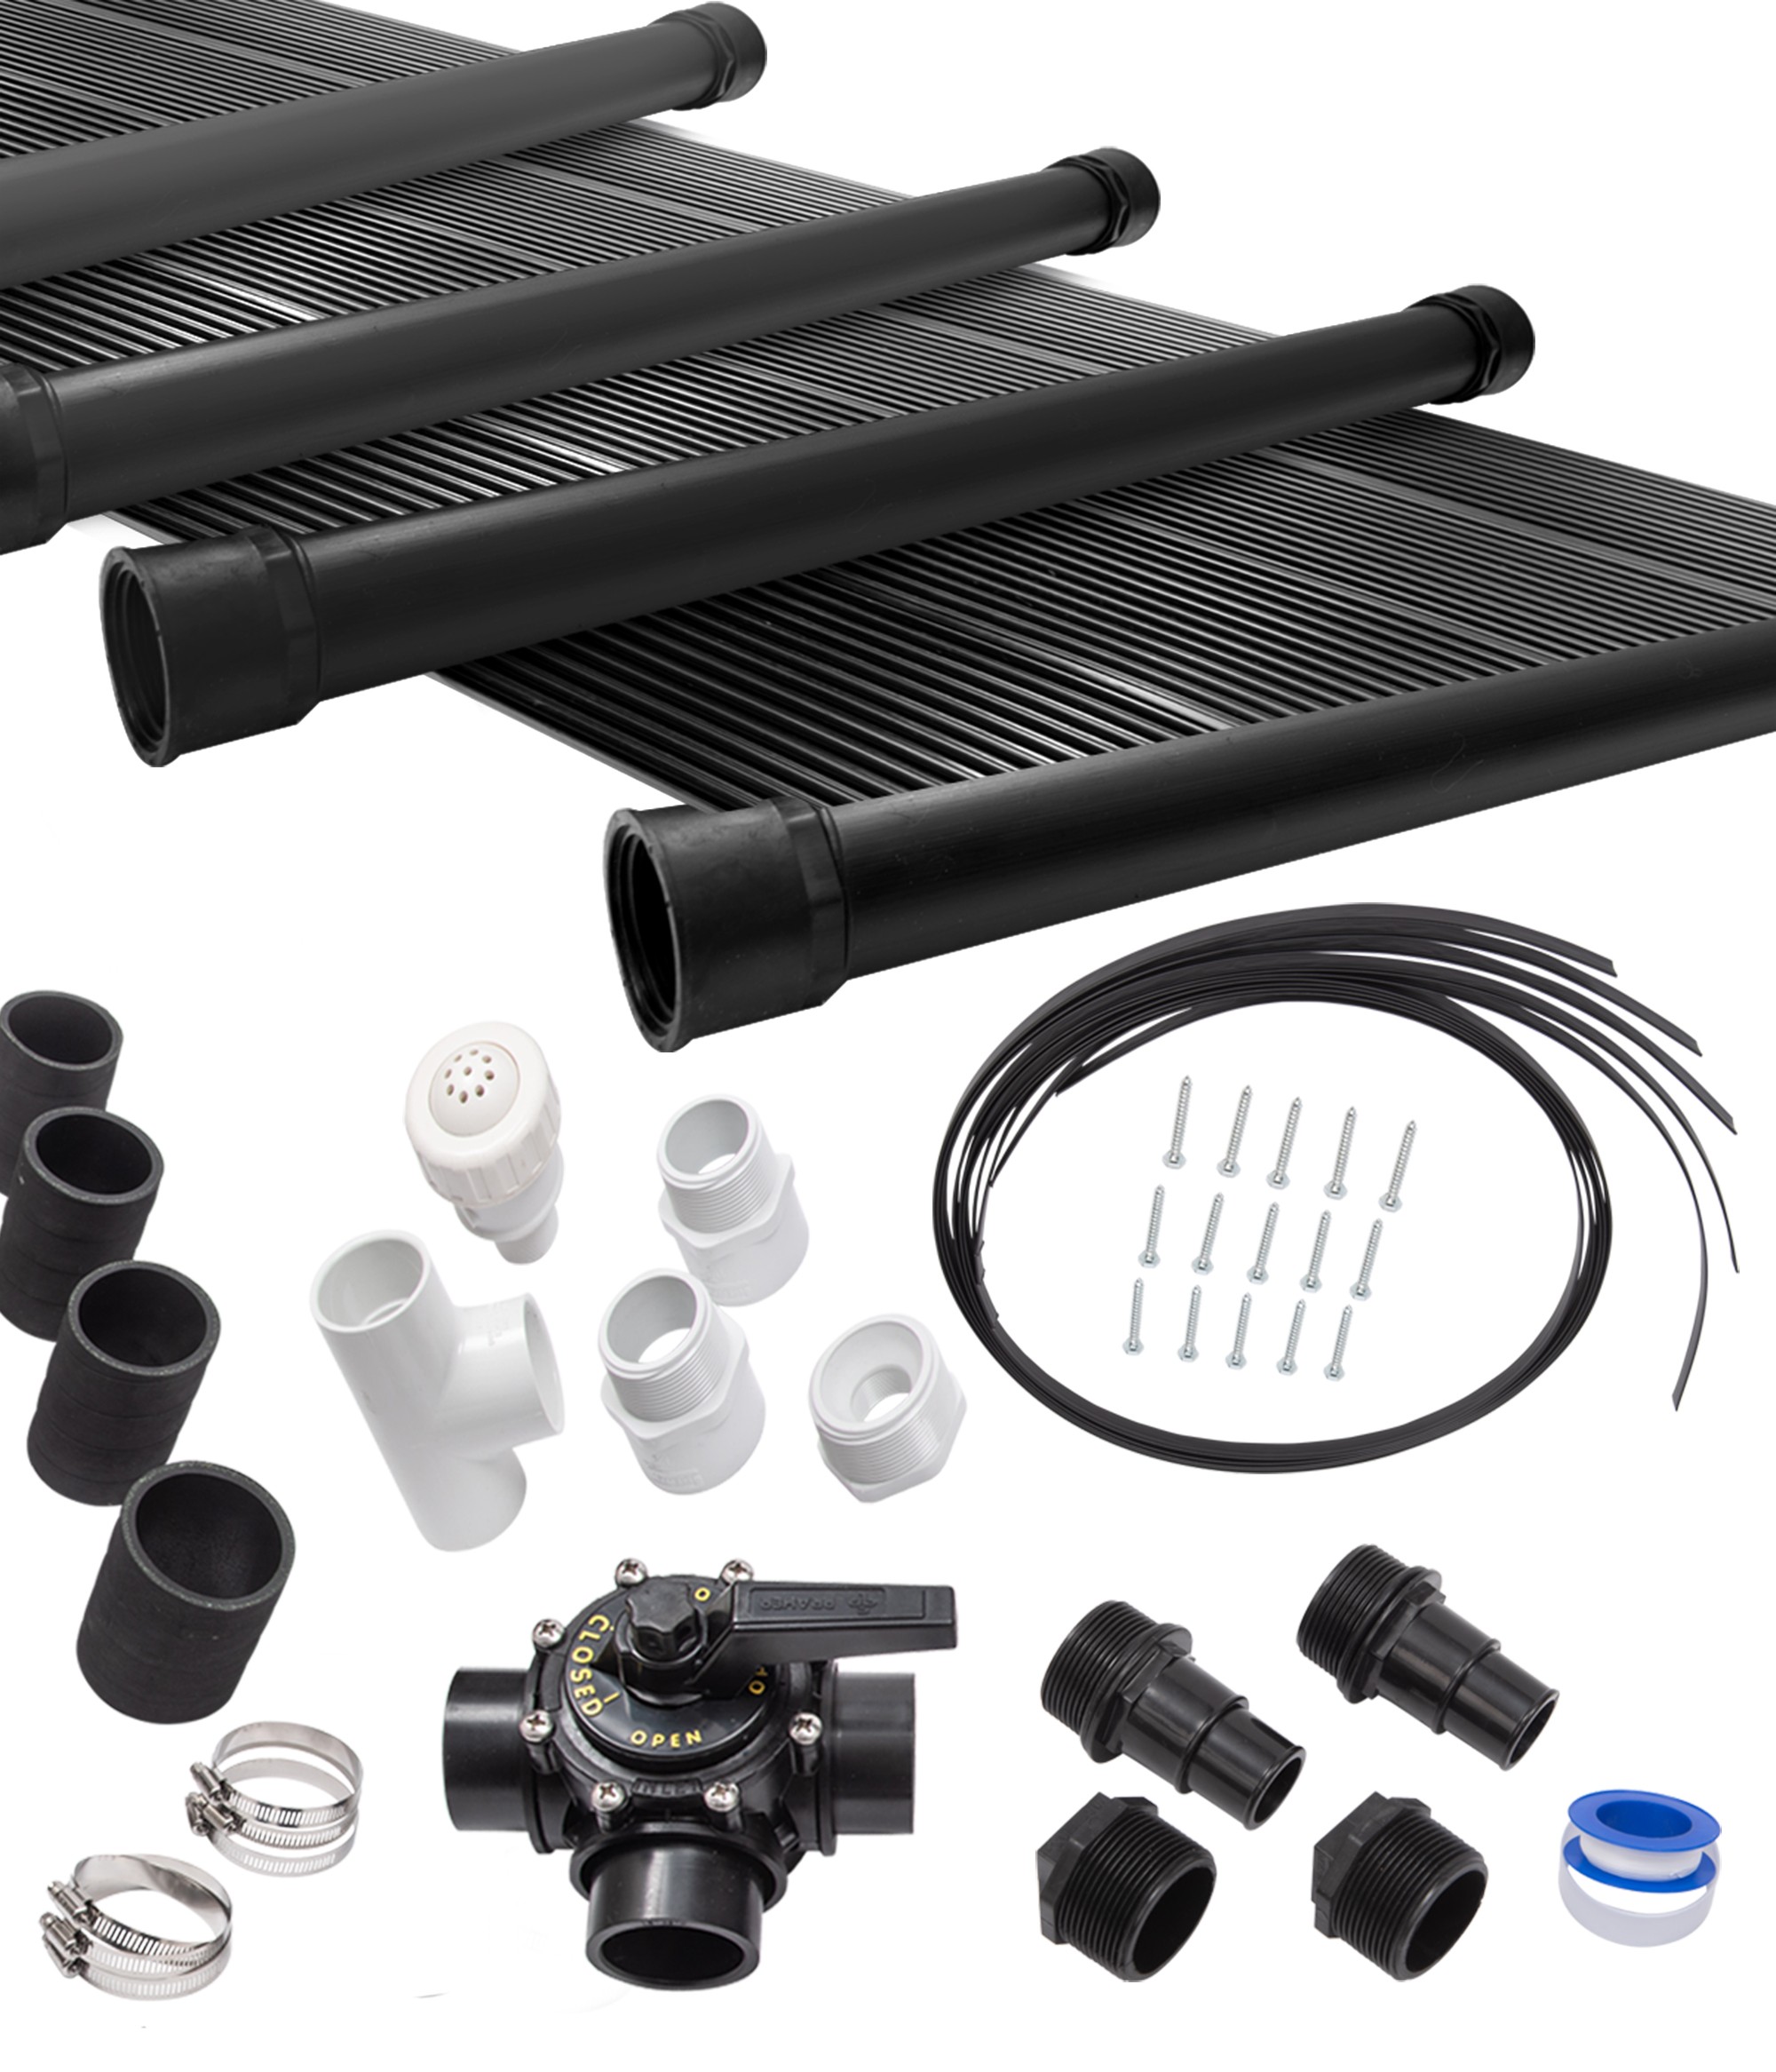 8-2X20' SunQuest Solar Swimming Pool Heater Complete System with Roof Kits